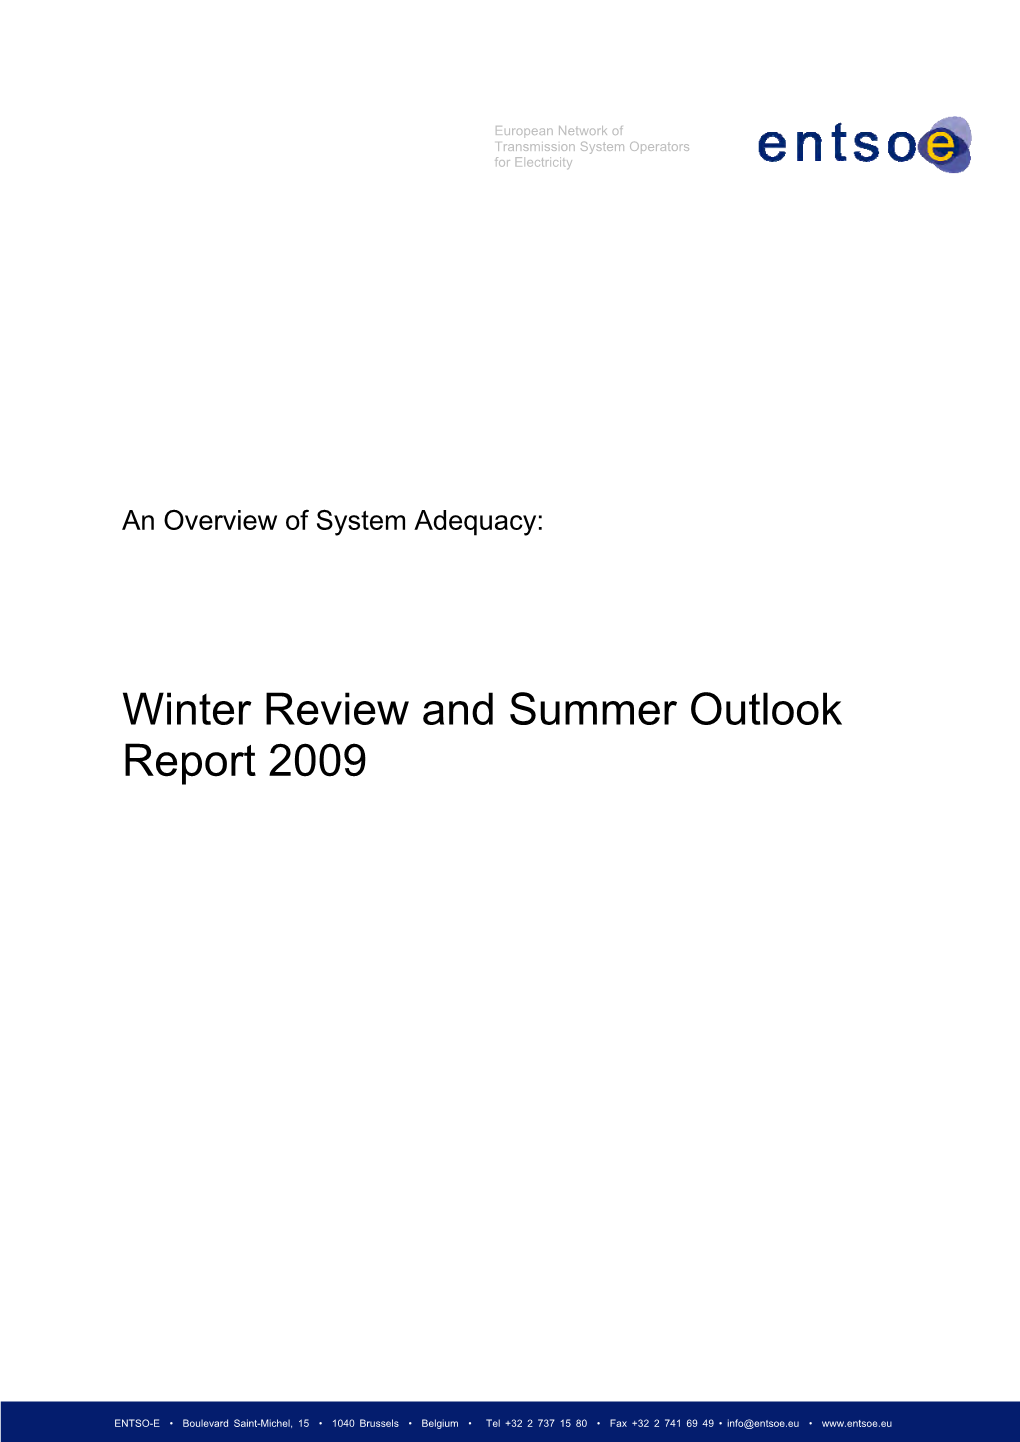 Winter Review and Summer Outlook 2009